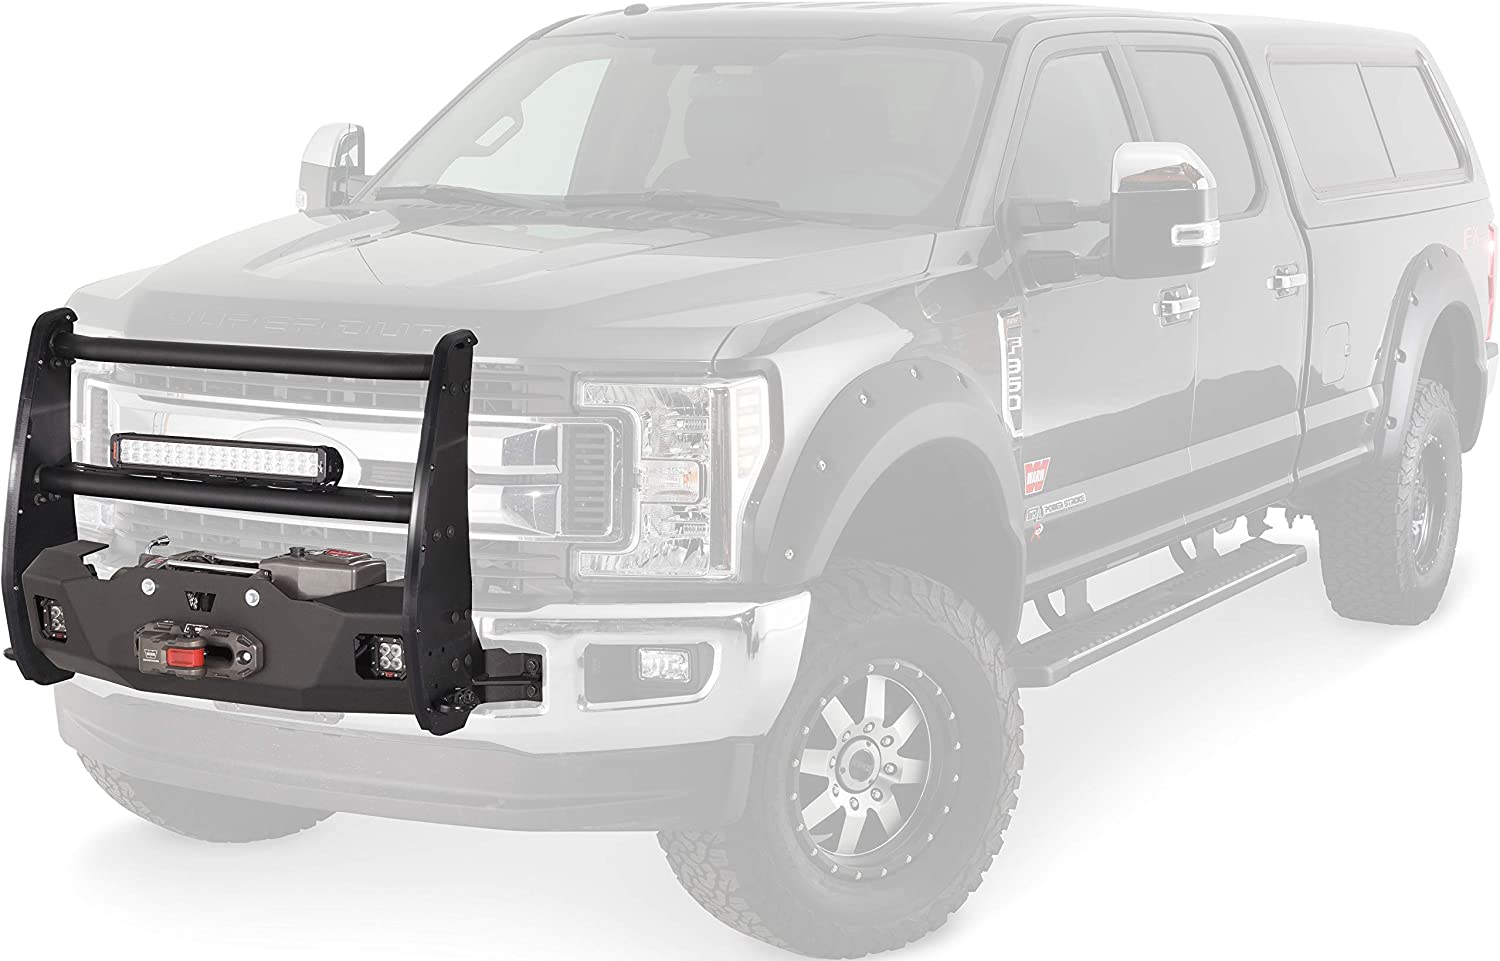 WARN 102957 Gen III Trans4mer Center Grille Guard Tube Bar, Fits: Ford Super Duty (2017-2019) (Tall Grille Guard)